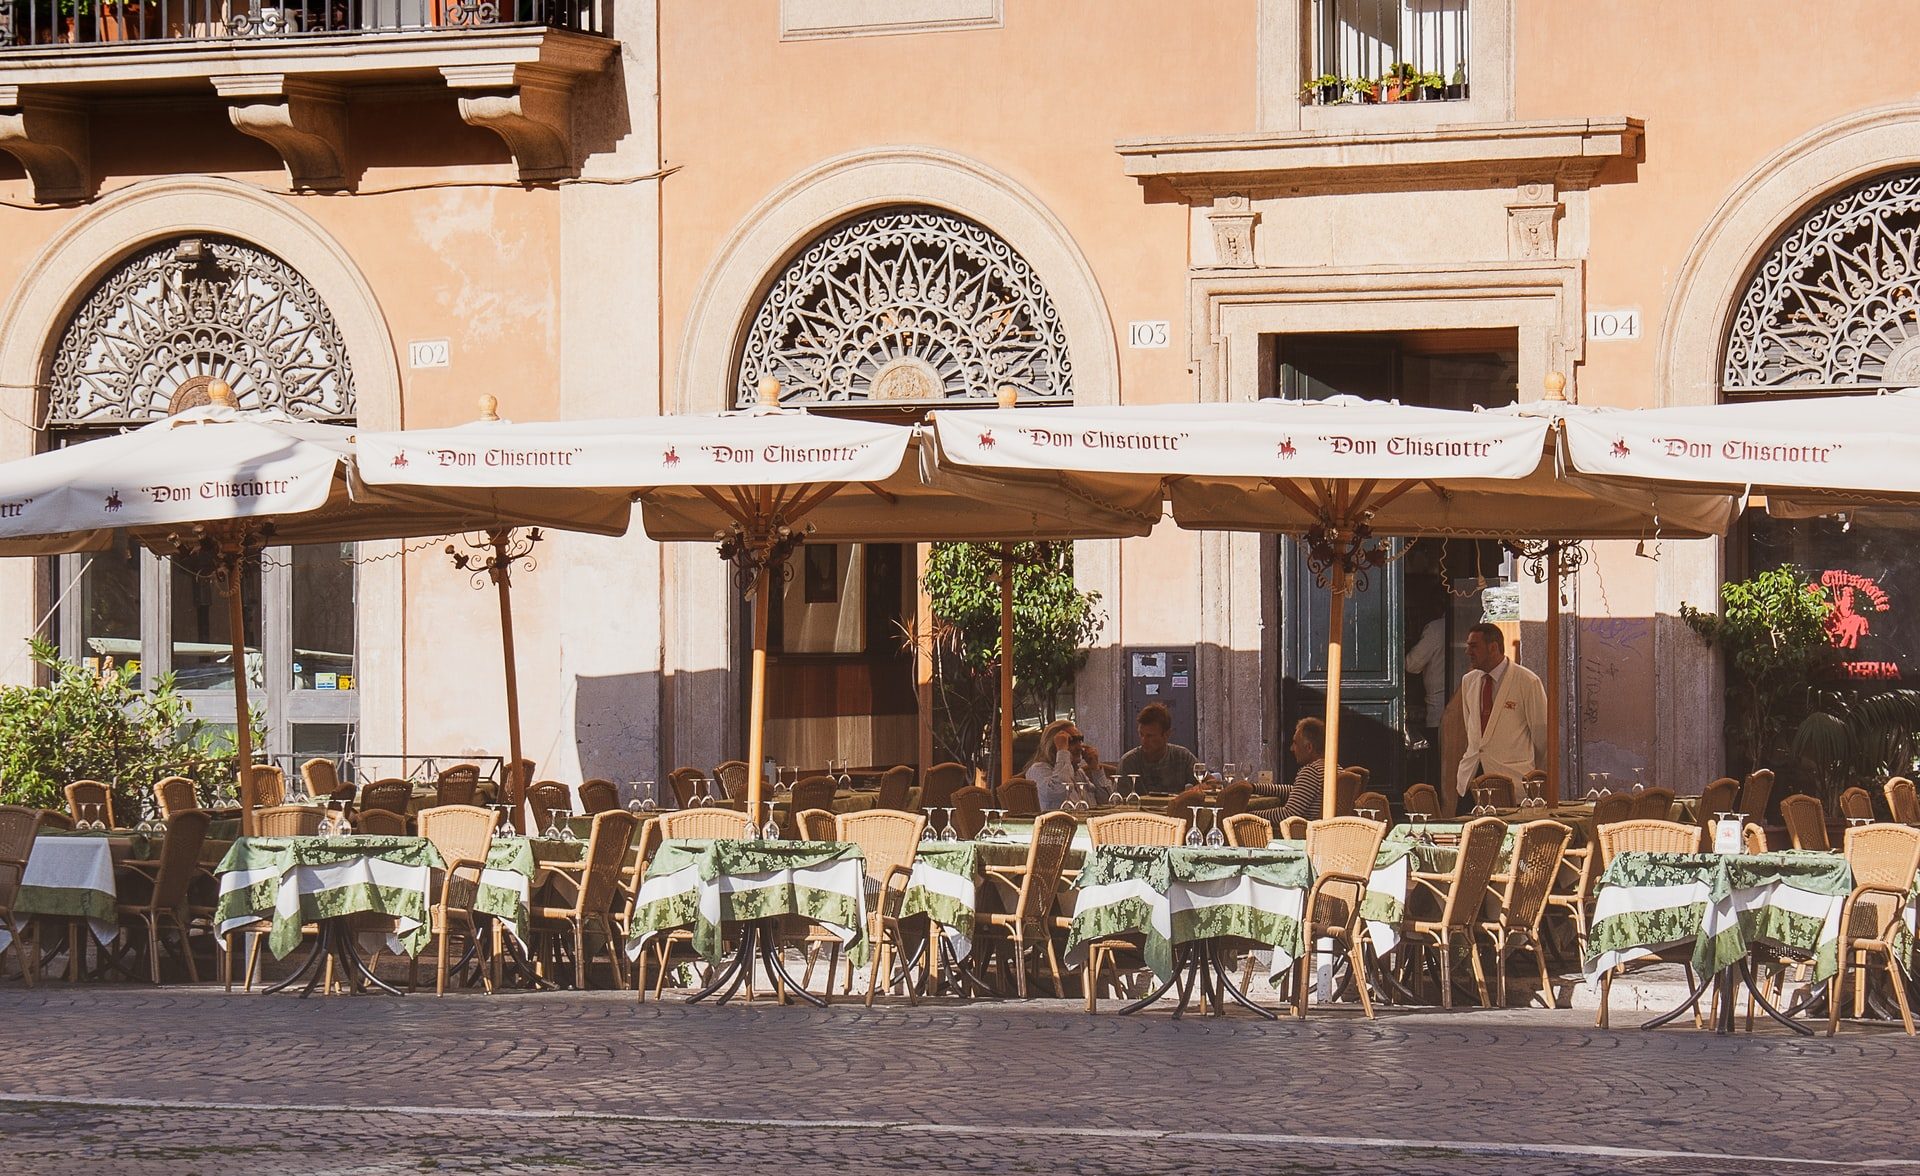 Where to Eat Near the Colosseum: Cafes, Bars, and More – Blog